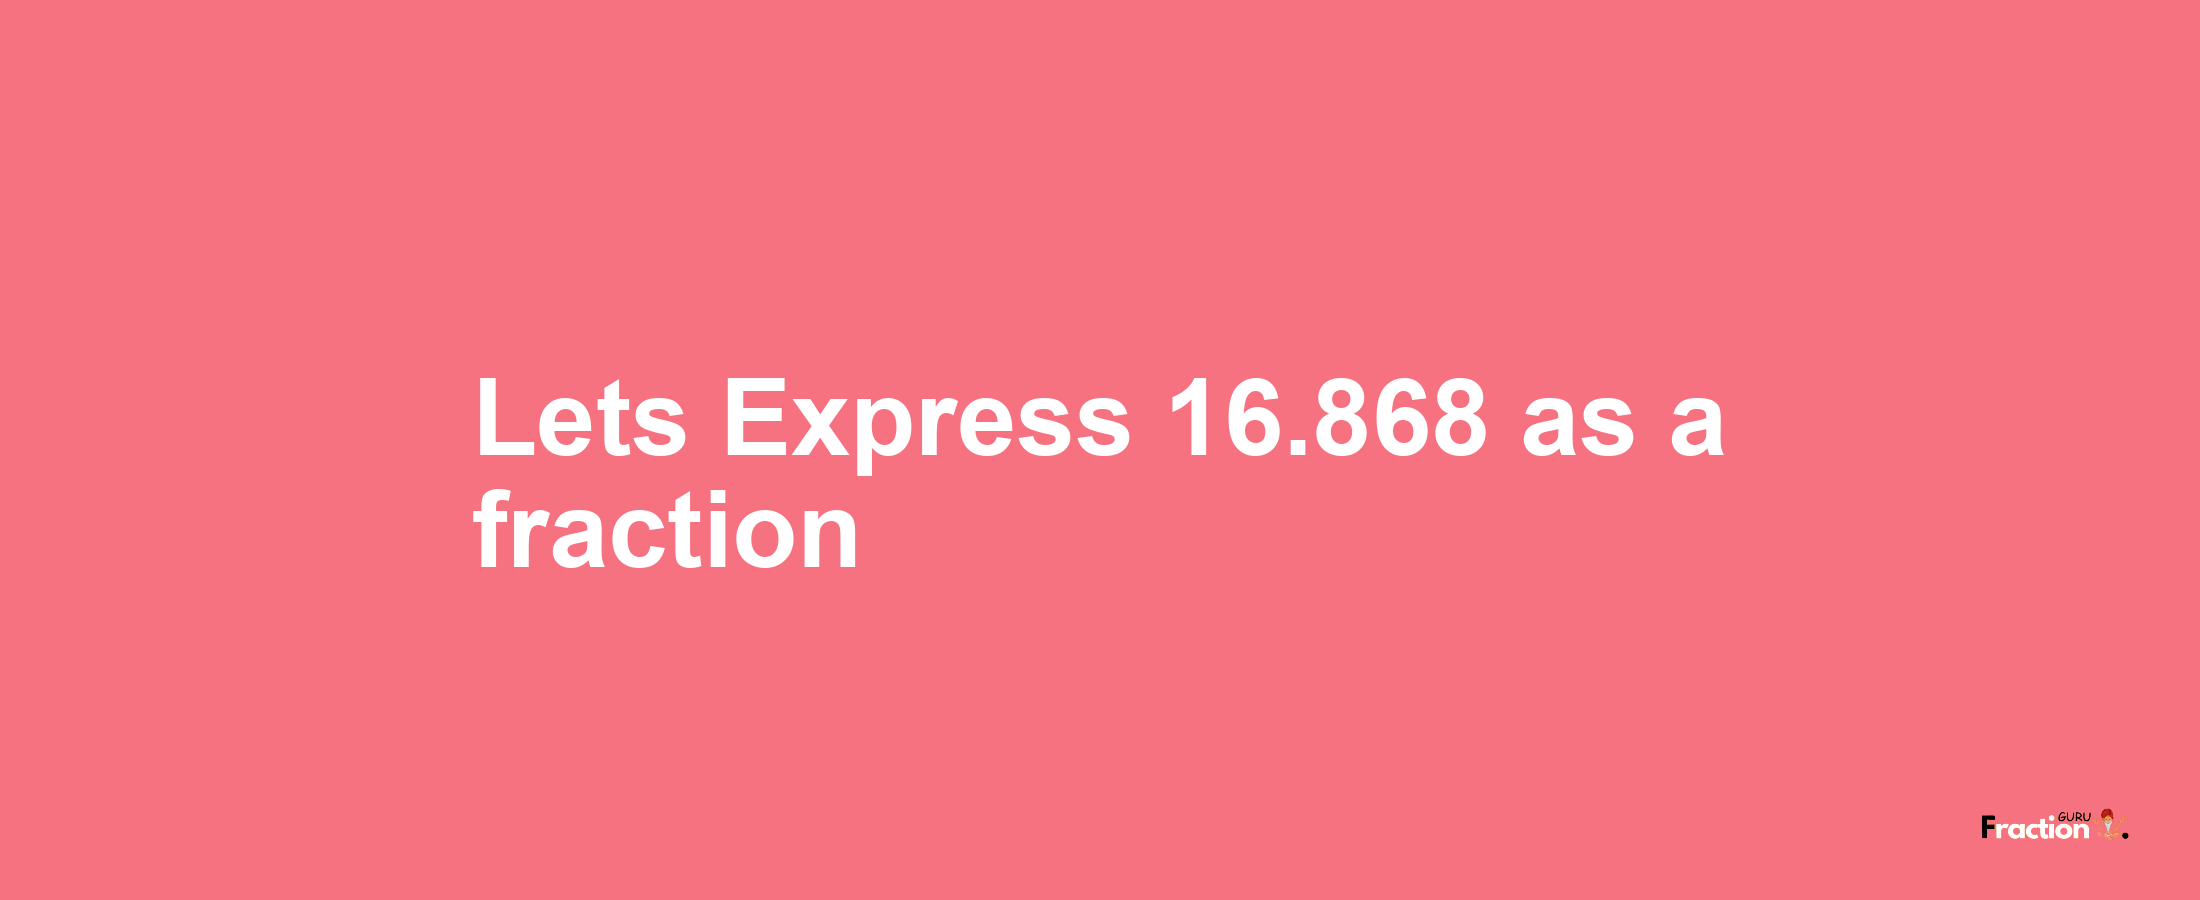 Lets Express 16.868 as afraction